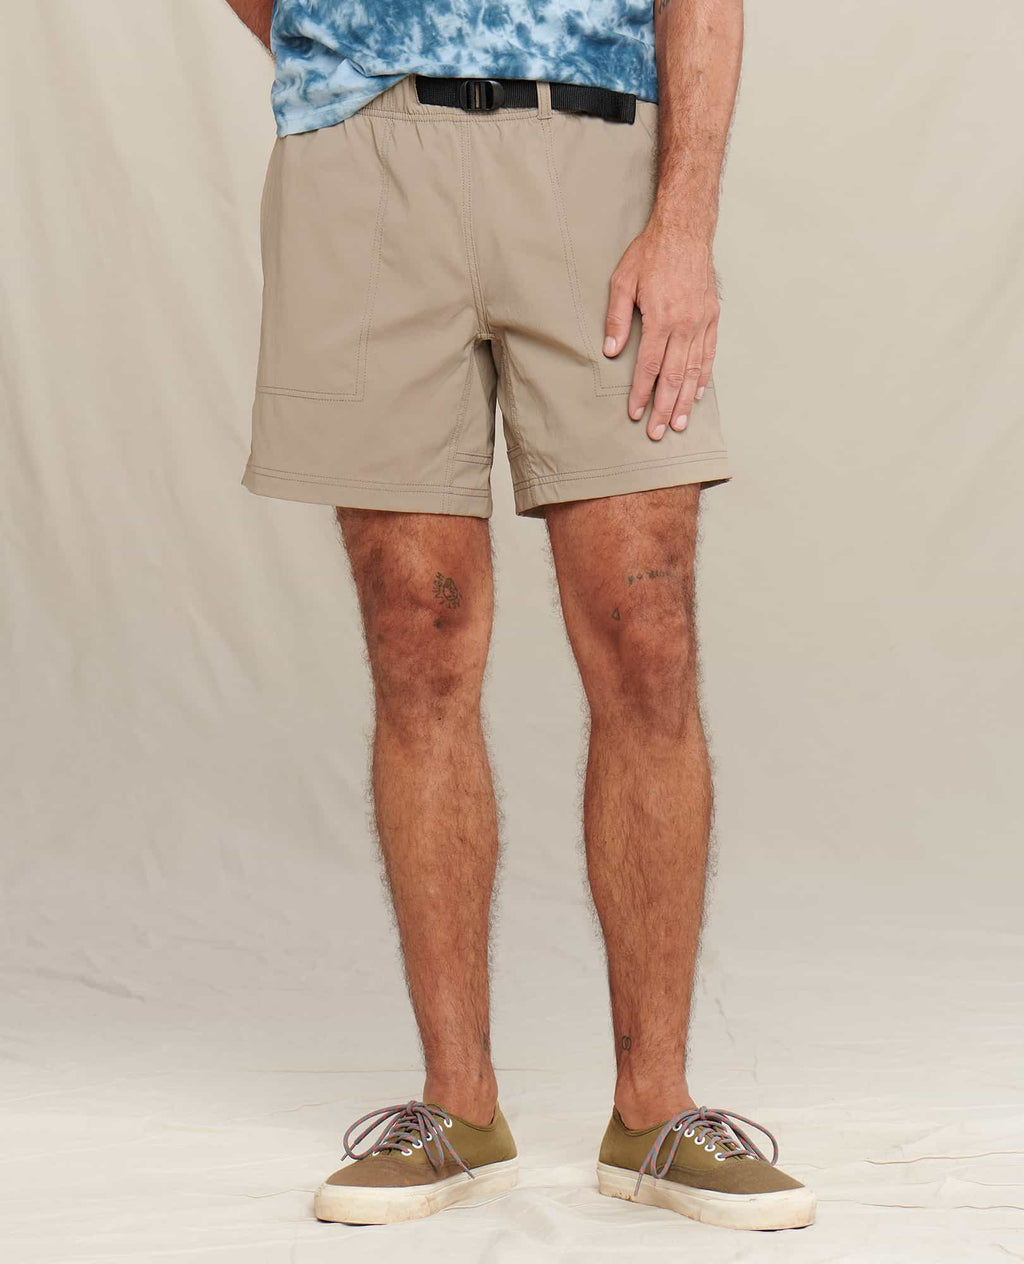 Patagonia Heritage Stand Up Shorts, 7 Inseam - Mens, FREE SHIPPING in  Canada